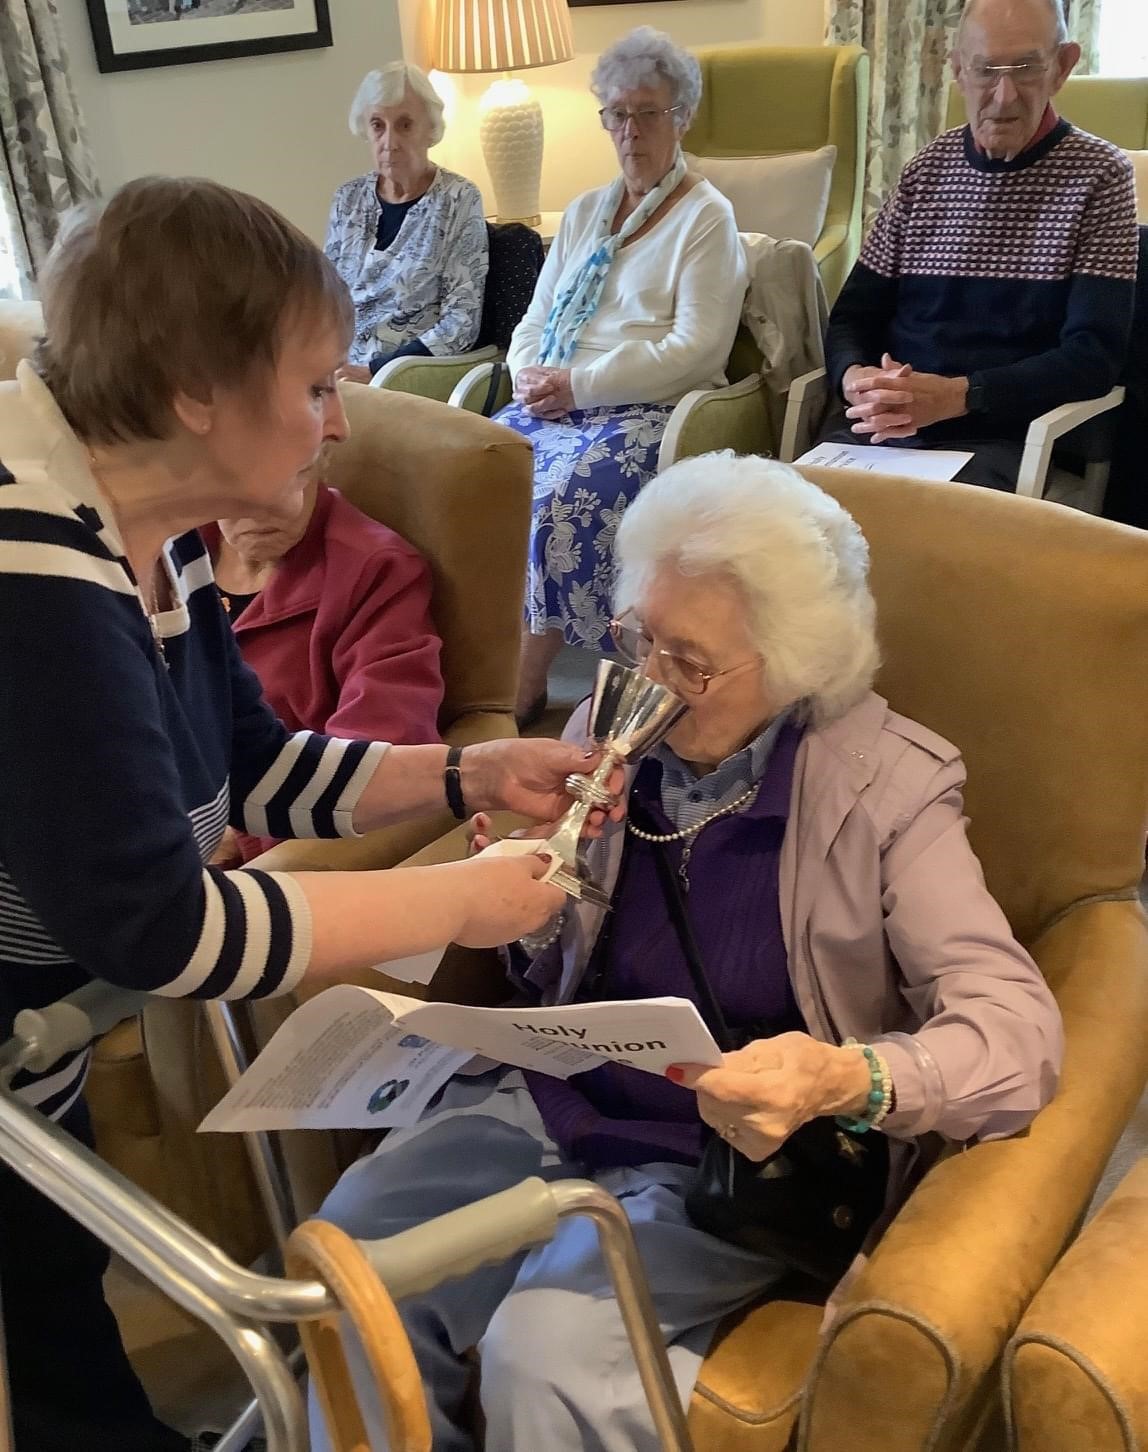 A member of Lapa's congregation helps a care home resident to receive communion.